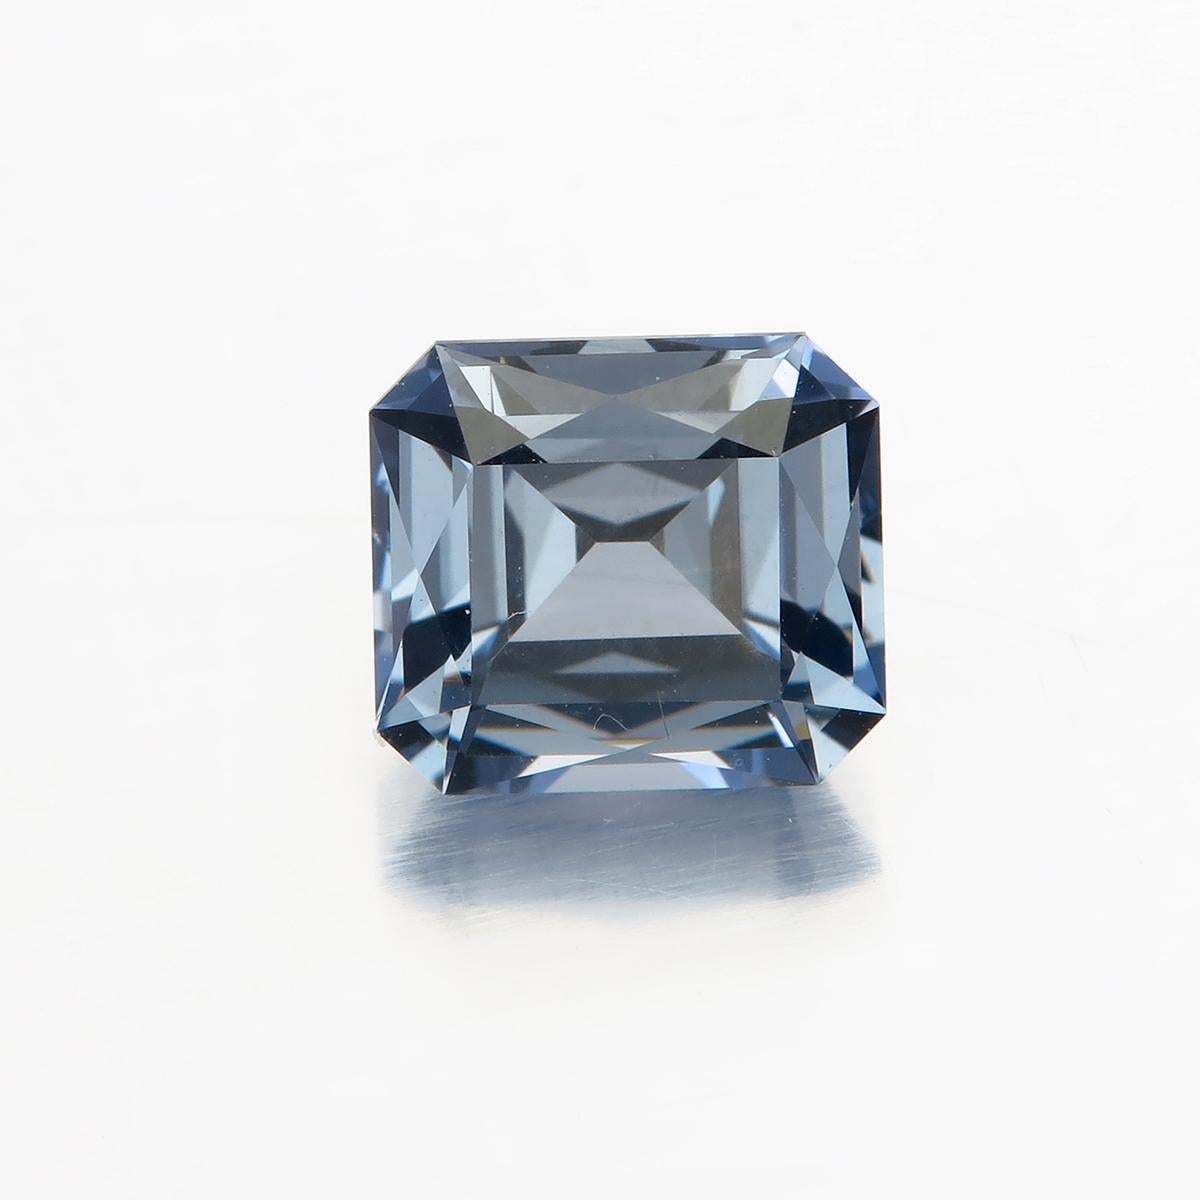 A Sparkling Flawless 2.11 carat Blue Spinel Lotus Certified 
Dimensions 7.67 x 6.91 x 4.52 mm
Shape: Octagonal Faceted Cut
Weight: 2.11 carat
No Heat
Lotus certified 7337-5059
Due to this gem's high degree of clarity. origin determination is not